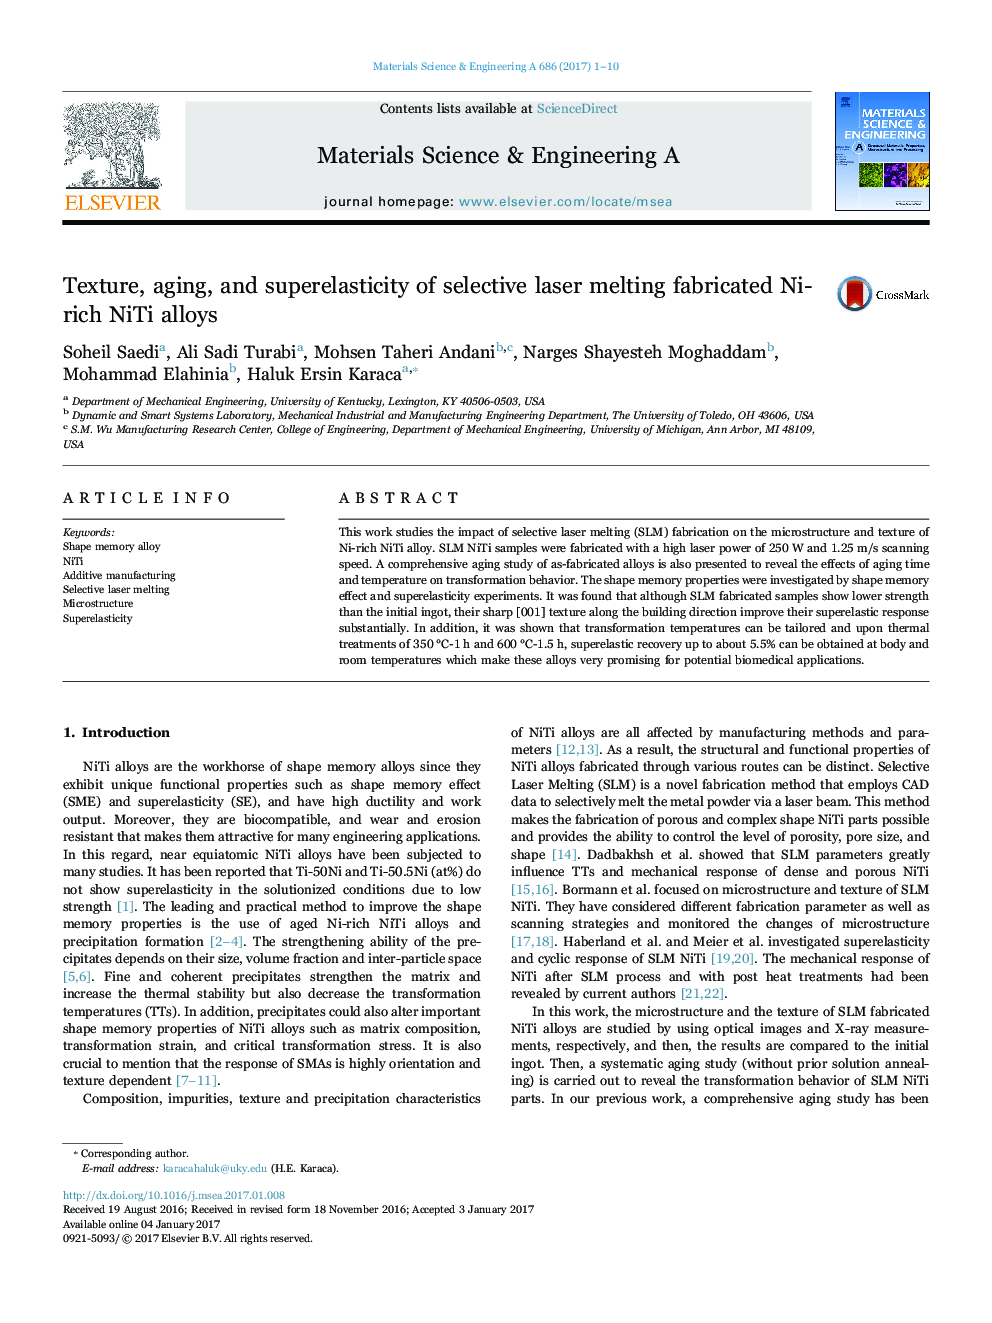 Texture, aging, and superelasticity of selective laser melting fabricated Ni-rich NiTi alloys